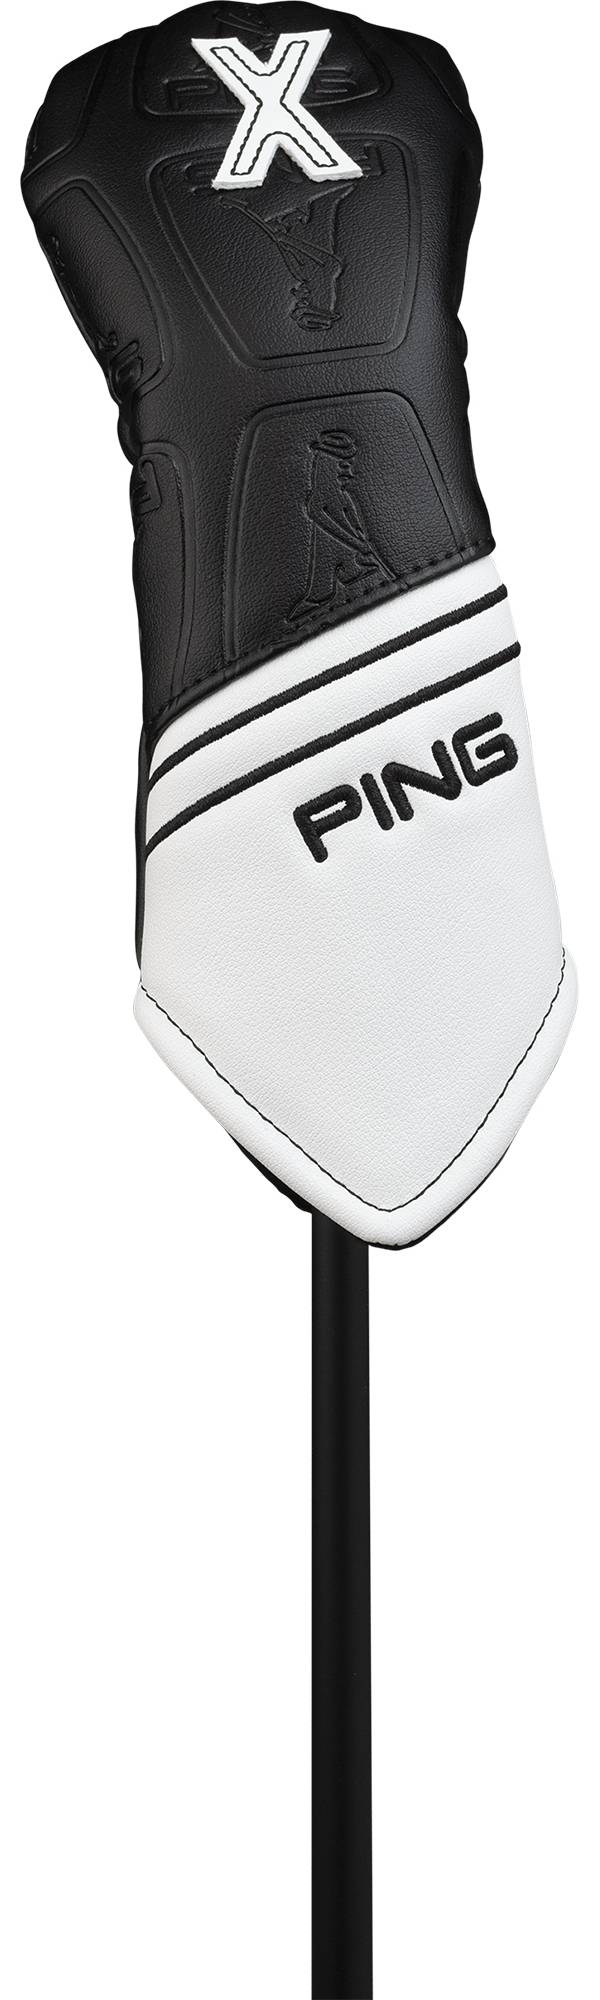 PING Core Hybrid Headcover product image